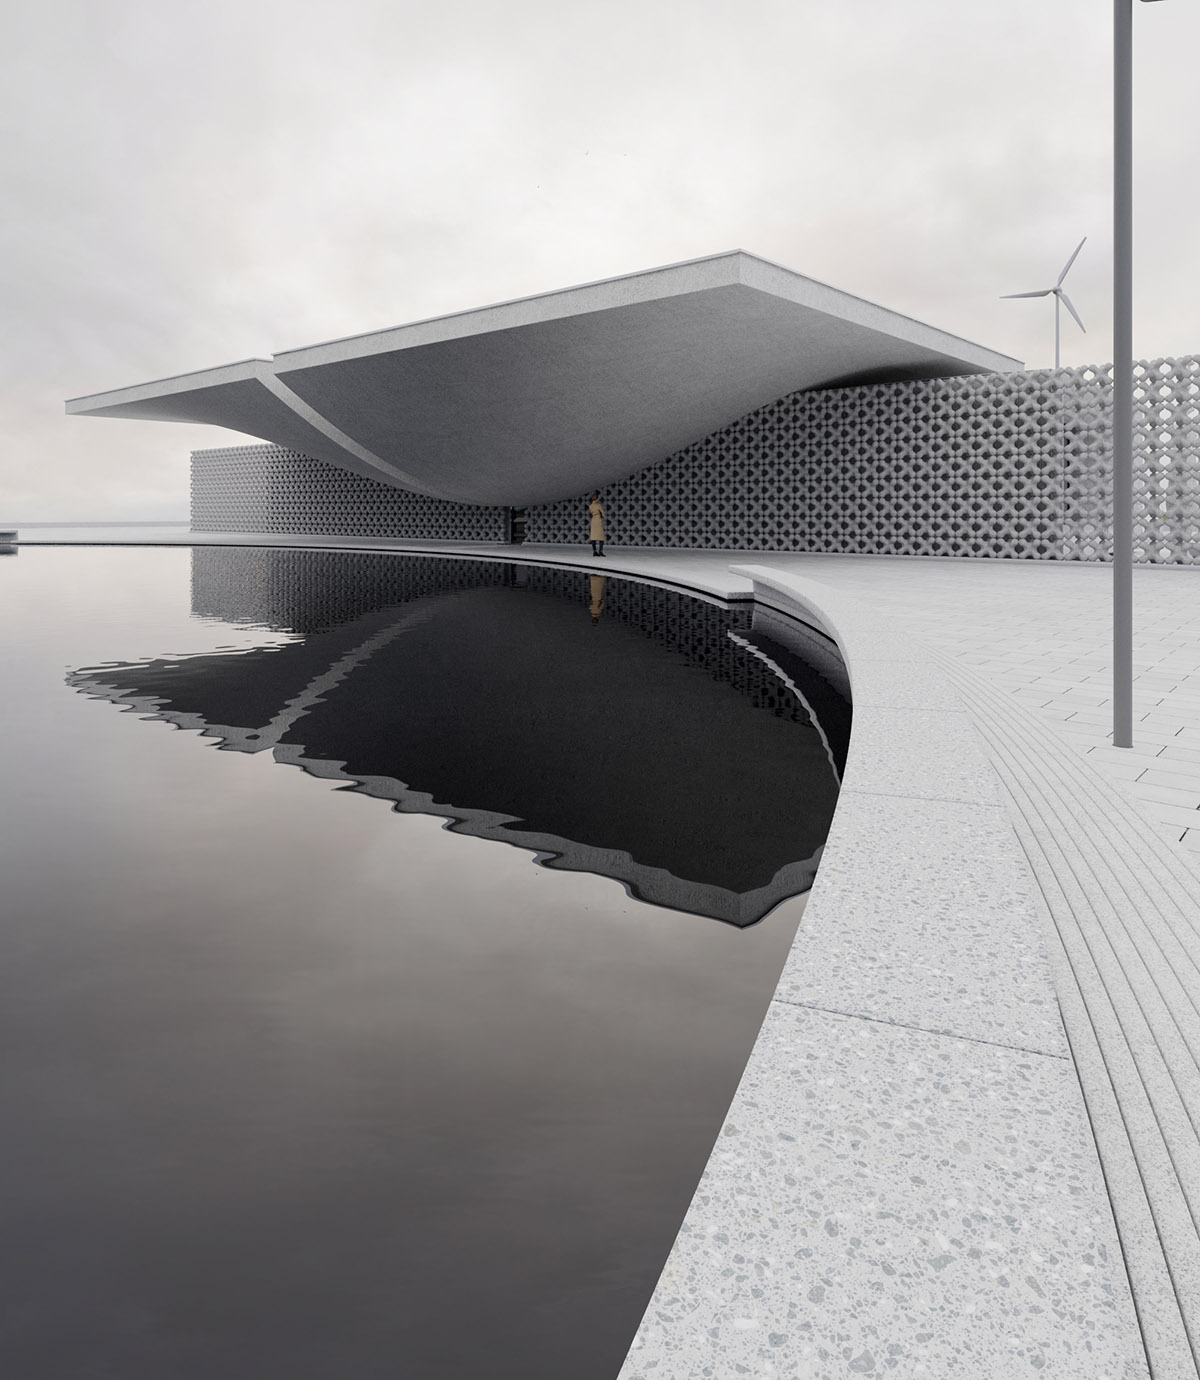 Makhno Studio proposes visitor centre with bulbous volume on Dnipro embankment, Ukraine 